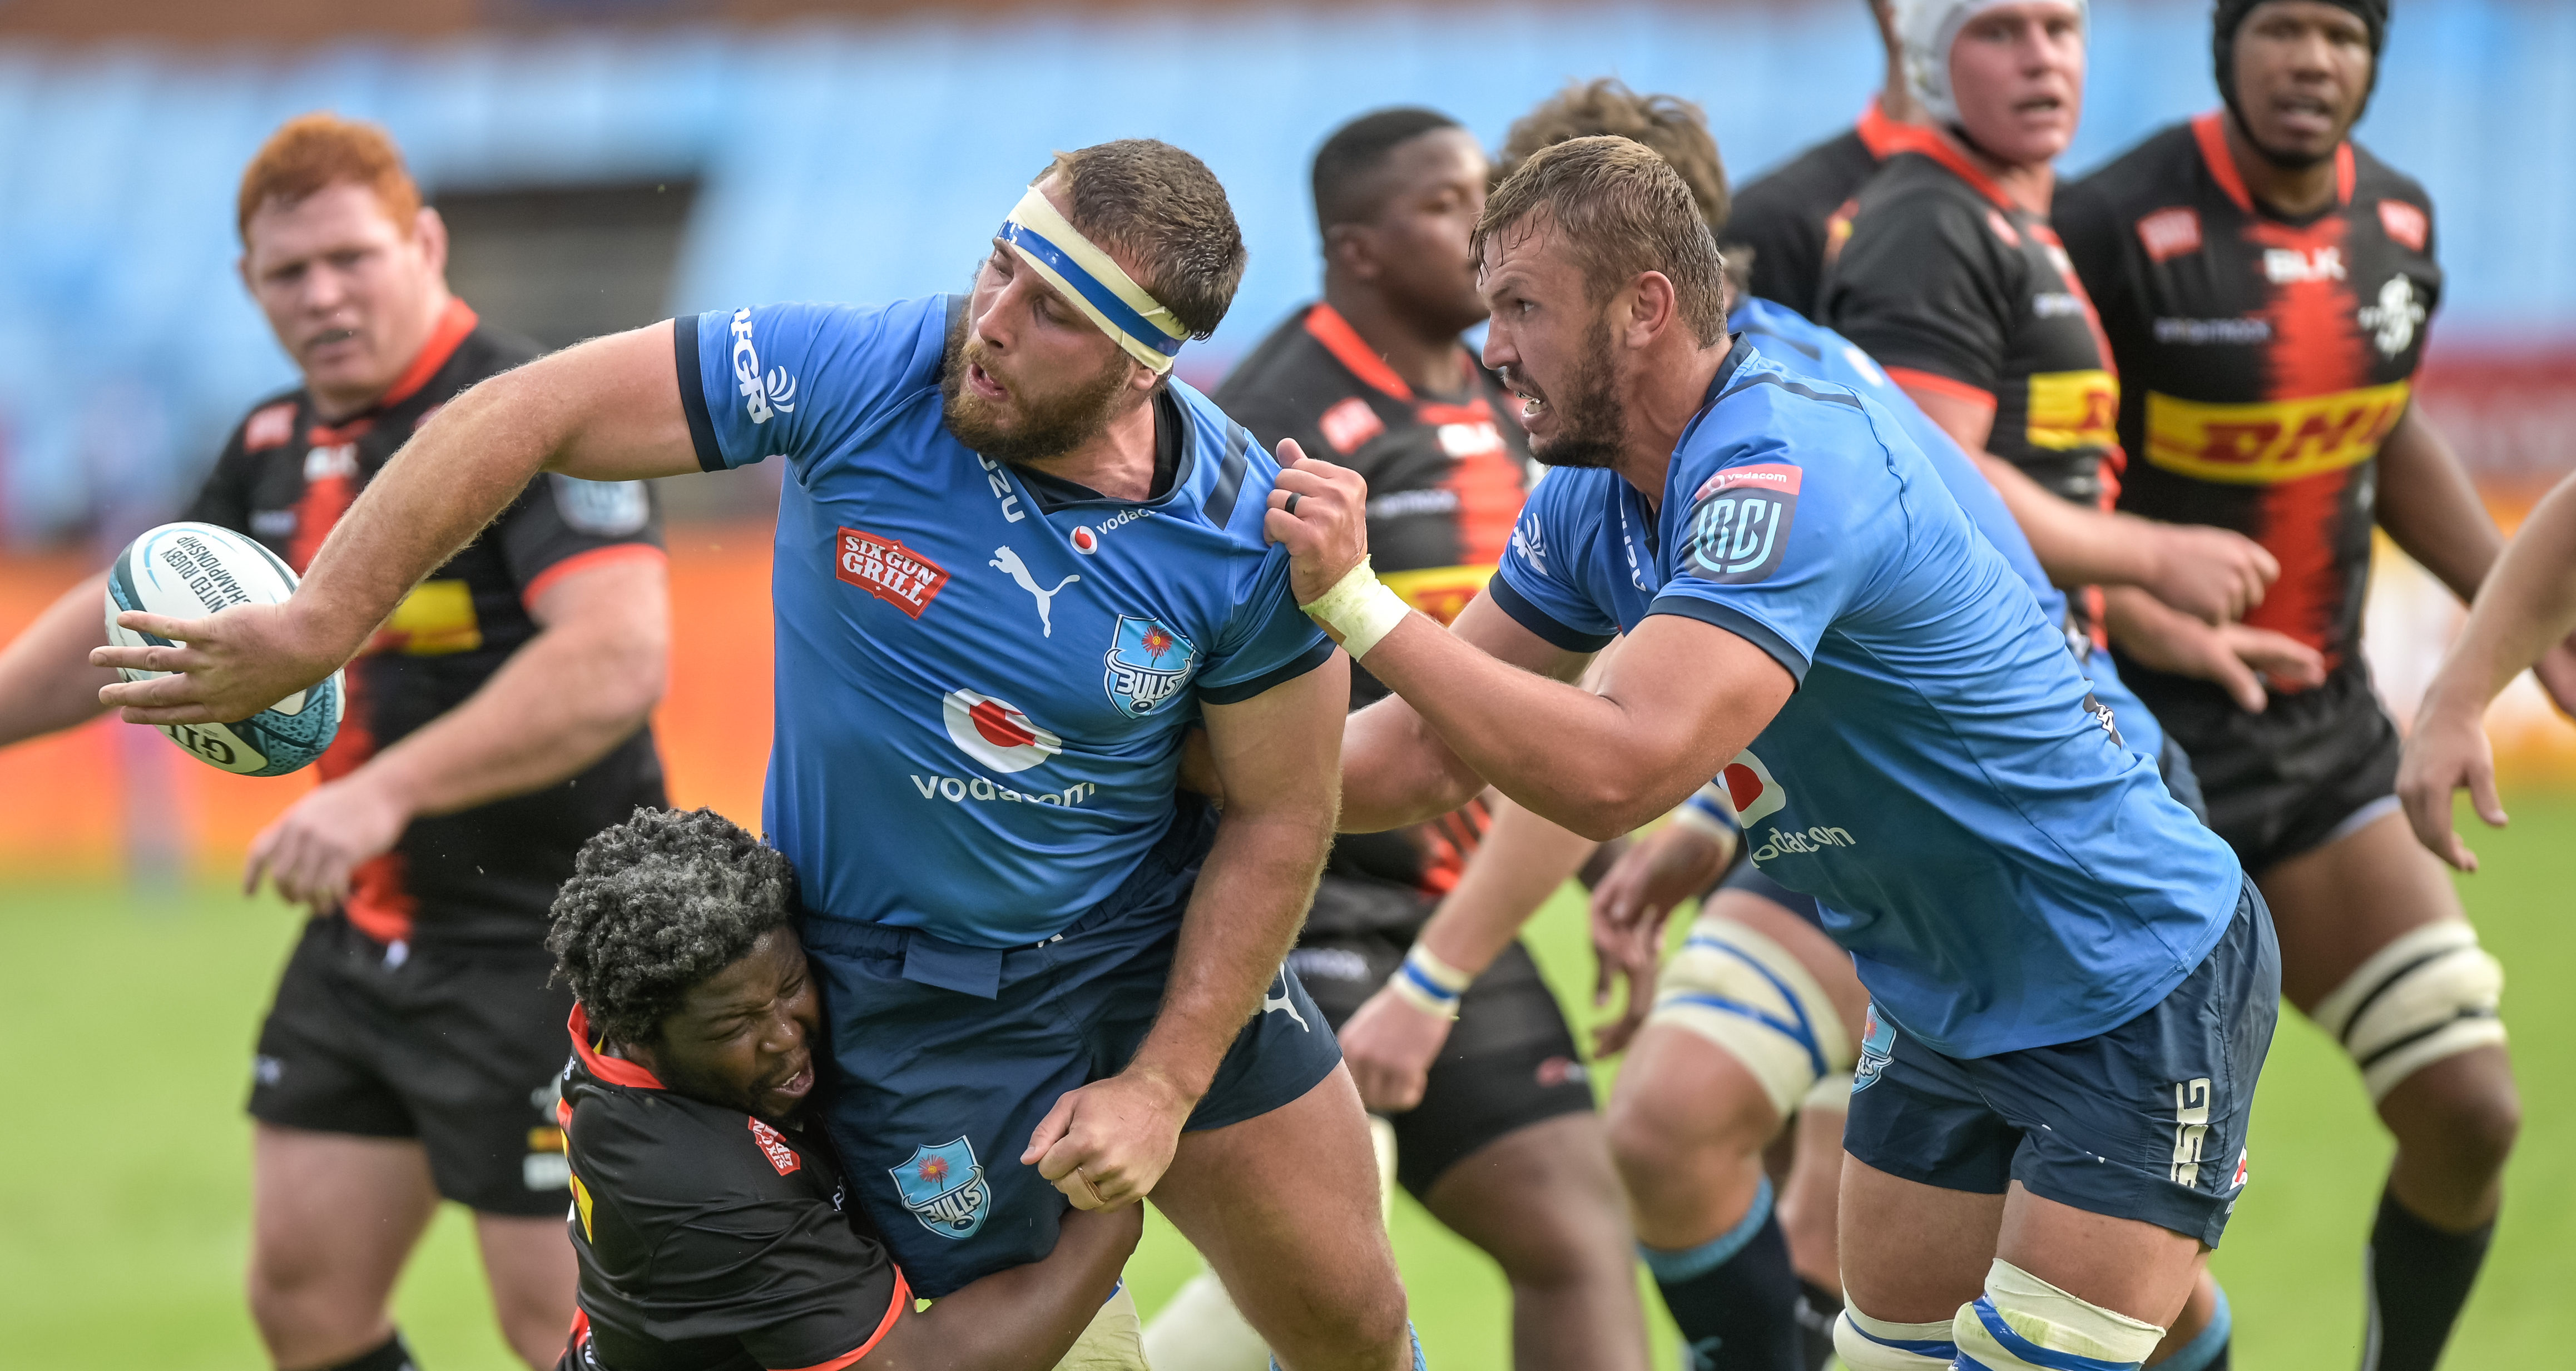 Gerhard Steenekamp of the Vodacom Bulls during the United Rugby Championship 2021/22 game between the Vodacom Bulls and the DHL Stormers at Loftus Versfeld in Pretoria on 22 January 2022 ©Christiaan Kotze/BackpagePix